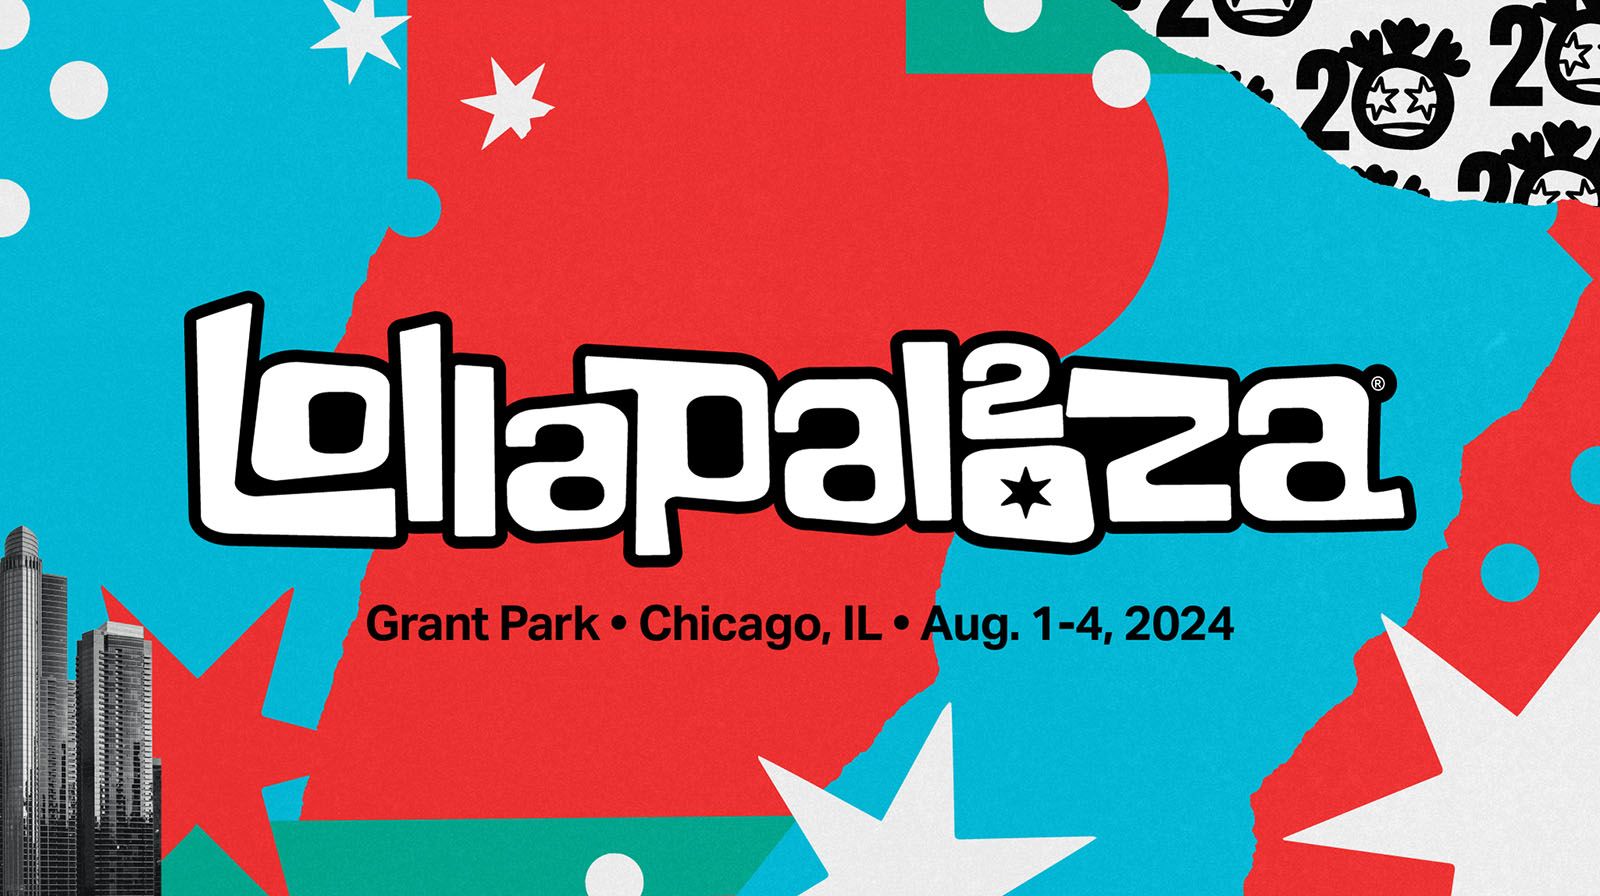 The lineup has been released for the 2024 Lollapalooza music festival.